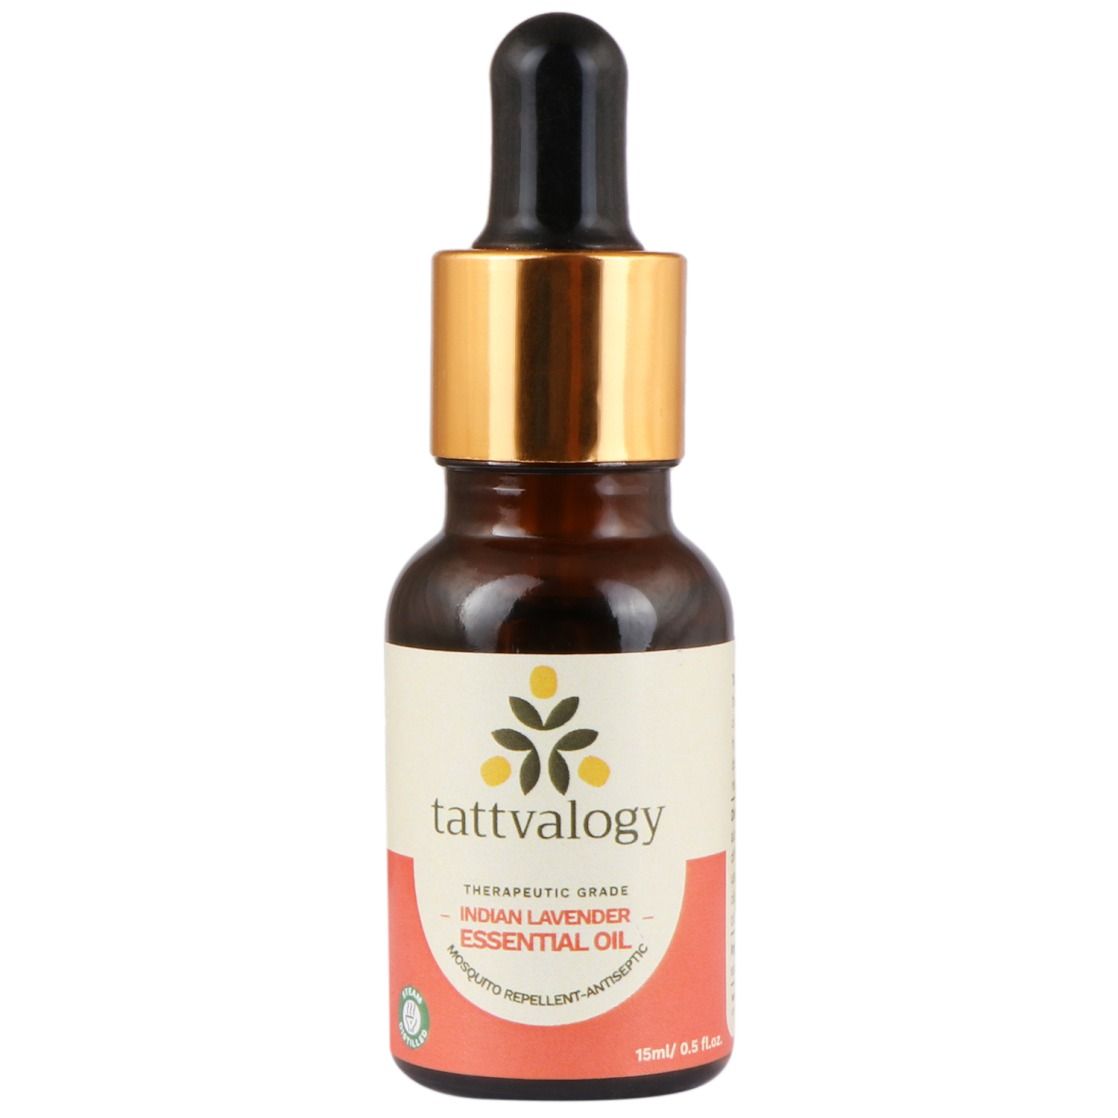 Tattvalogy Indian Lavender Essential Oil, Therapeutic Grade